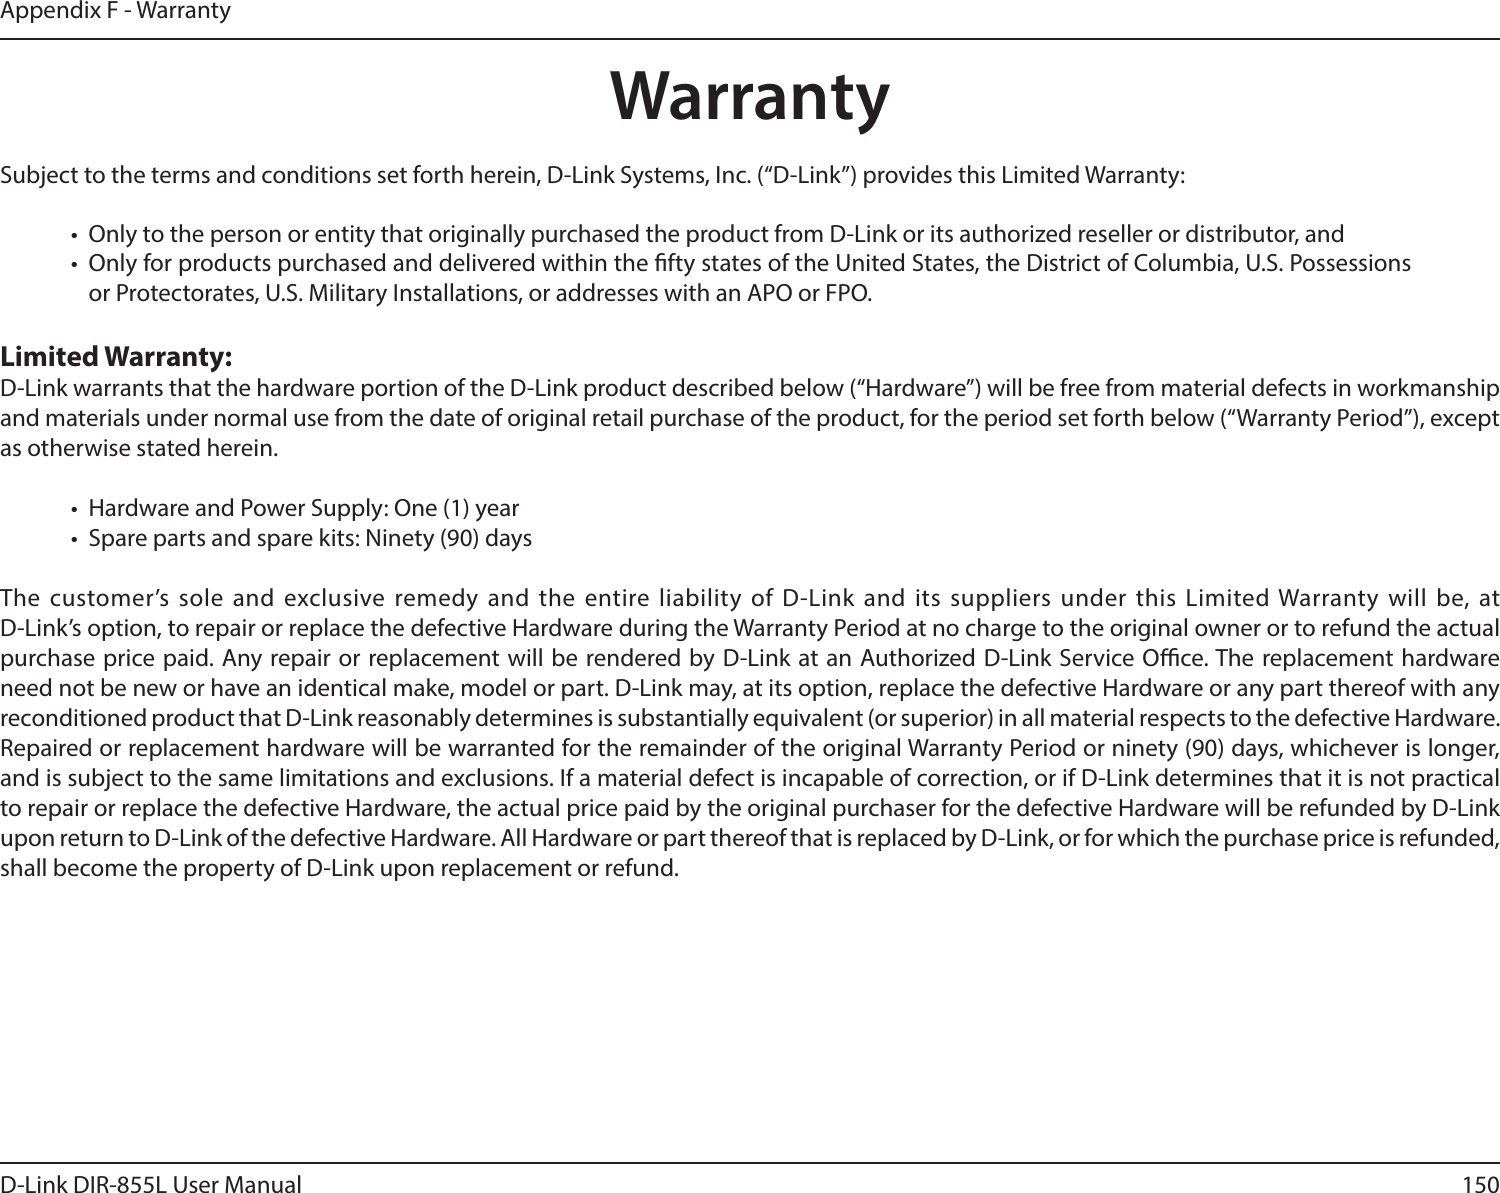 150D-Link DIR-855L User ManualAppendix F - WarrantyWarrantySubject to the terms and conditions set forth herein, D-Link Systems, Inc. (“D-Link”) provides this Limited Warranty:•  Only to the person or entity that originally purchased the product from D-Link or its authorized reseller or distributor, and•  Only for products purchased and delivered within the fty states of the United States, the District of Columbia, U.S. Possessions or Protectorates, U.S. Military Installations, or addresses with an APO or FPO.Limited Warranty:D-Link warrants that the hardware portion of the D-Link product described below (“Hardware”) will be free from material defects in workmanship and materials under normal use from the date of original retail purchase of the product, for the period set forth below (“Warranty Period”), except as otherwise stated herein.•  Hardware and Power Supply: One (1) year•  Spare parts and spare kits: Ninety (90) daysThe customer’s sole and exclusive remedy and the entire liability of D-Link and its suppliers under this Limited Warranty will be, at  D-Link’s option, to repair or replace the defective Hardware during the Warranty Period at no charge to the original owner or to refund the actual purchase price paid. Any repair or replacement will be rendered by D-Link at an Authorized D-Link Service Oce. The replacement hardware need not be new or have an identical make, model or part. D-Link may, at its option, replace the defective Hardware or any part thereof with any reconditioned product that D-Link reasonably determines is substantially equivalent (or superior) in all material respects to the defective Hardware. Repaired or replacement hardware will be warranted for the remainder of the original Warranty Period or ninety (90) days, whichever is longer, and is subject to the same limitations and exclusions. If a material defect is incapable of correction, or if D-Link determines that it is not practical to repair or replace the defective Hardware, the actual price paid by the original purchaser for the defective Hardware will be refunded by D-Link upon return to D-Link of the defective Hardware. All Hardware or part thereof that is replaced by D-Link, or for which the purchase price is refunded, shall become the property of D-Link upon replacement or refund.